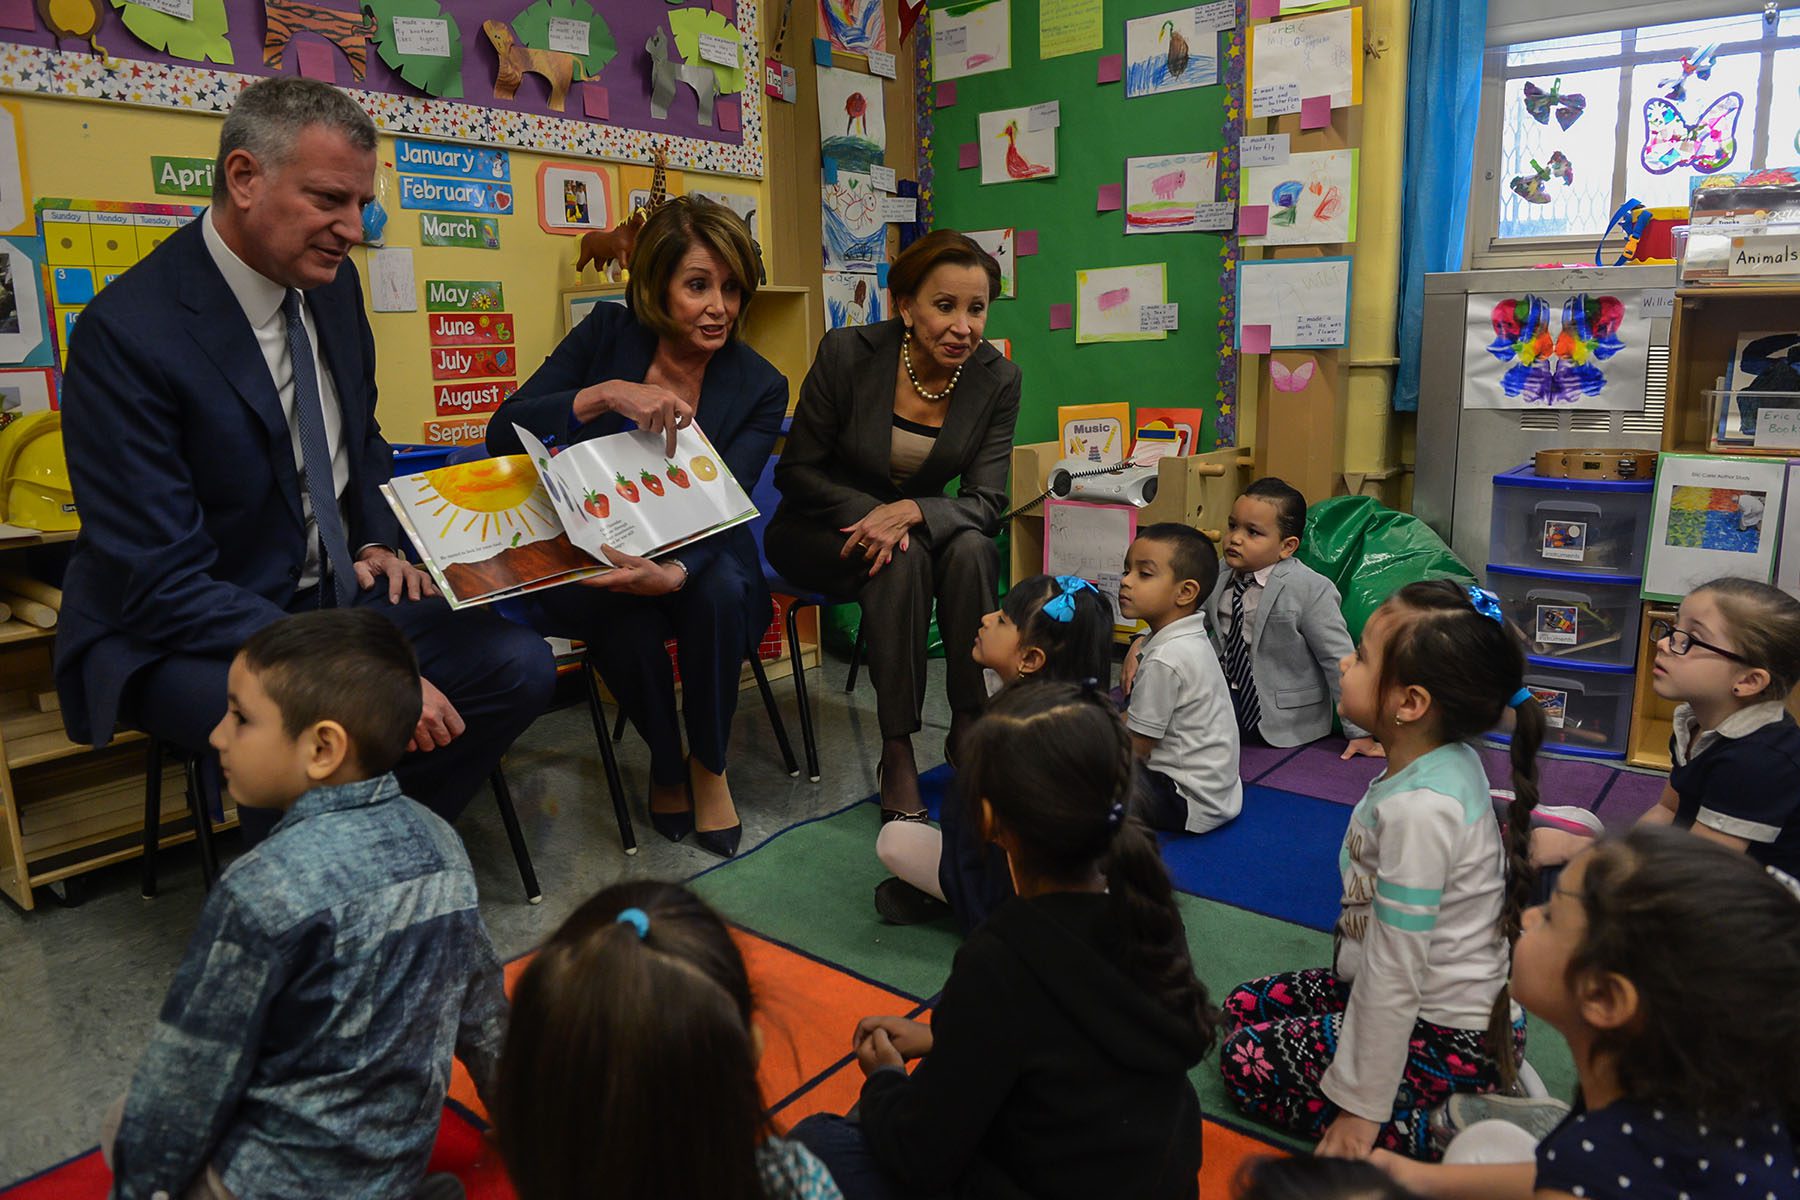 Nancy Pelosi, flanked by Bill DeBlasio and Nydia Velazquez points to a drawing of a strawberry in a children's book while children look on in a colorful classroom.